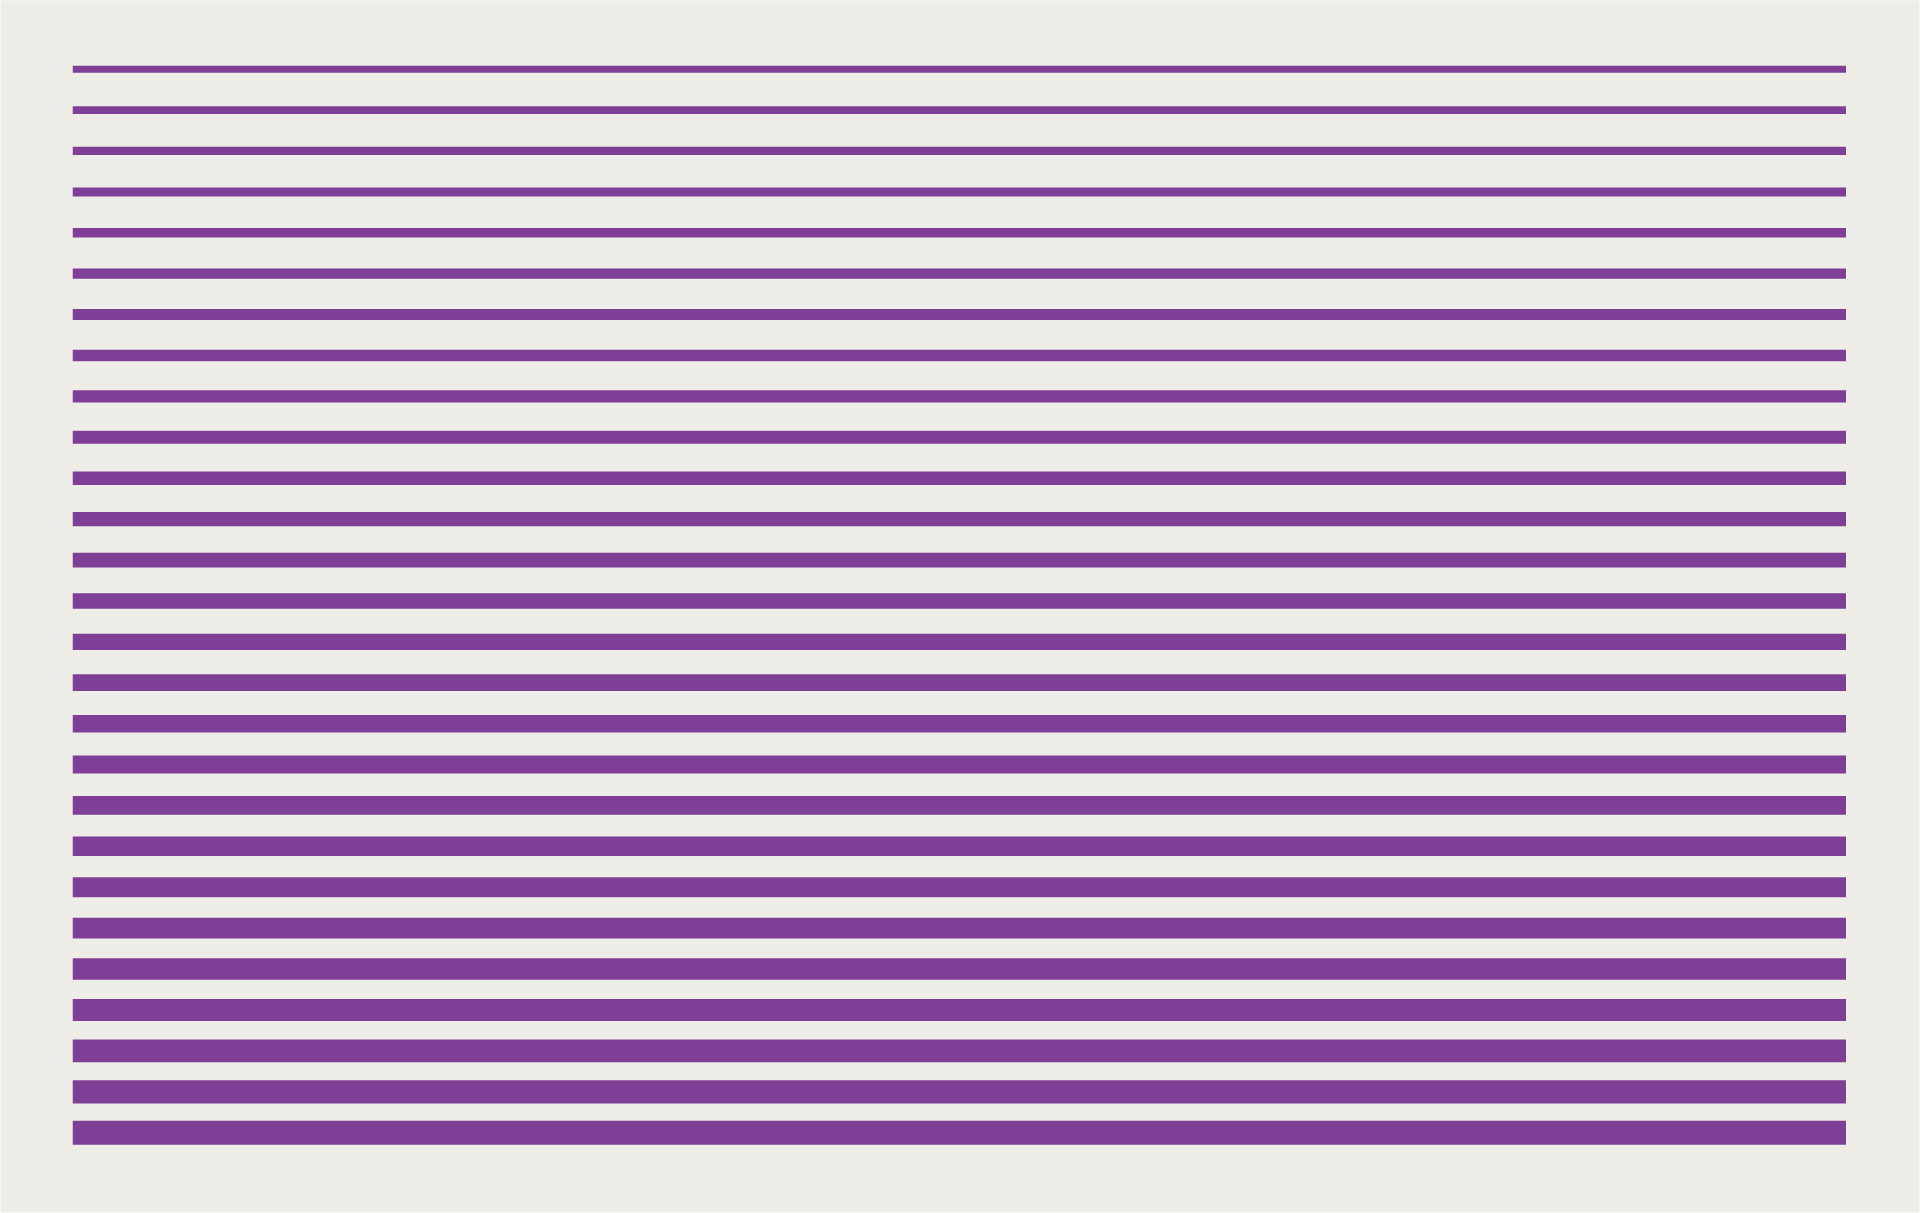 Purple striped graphic with no words